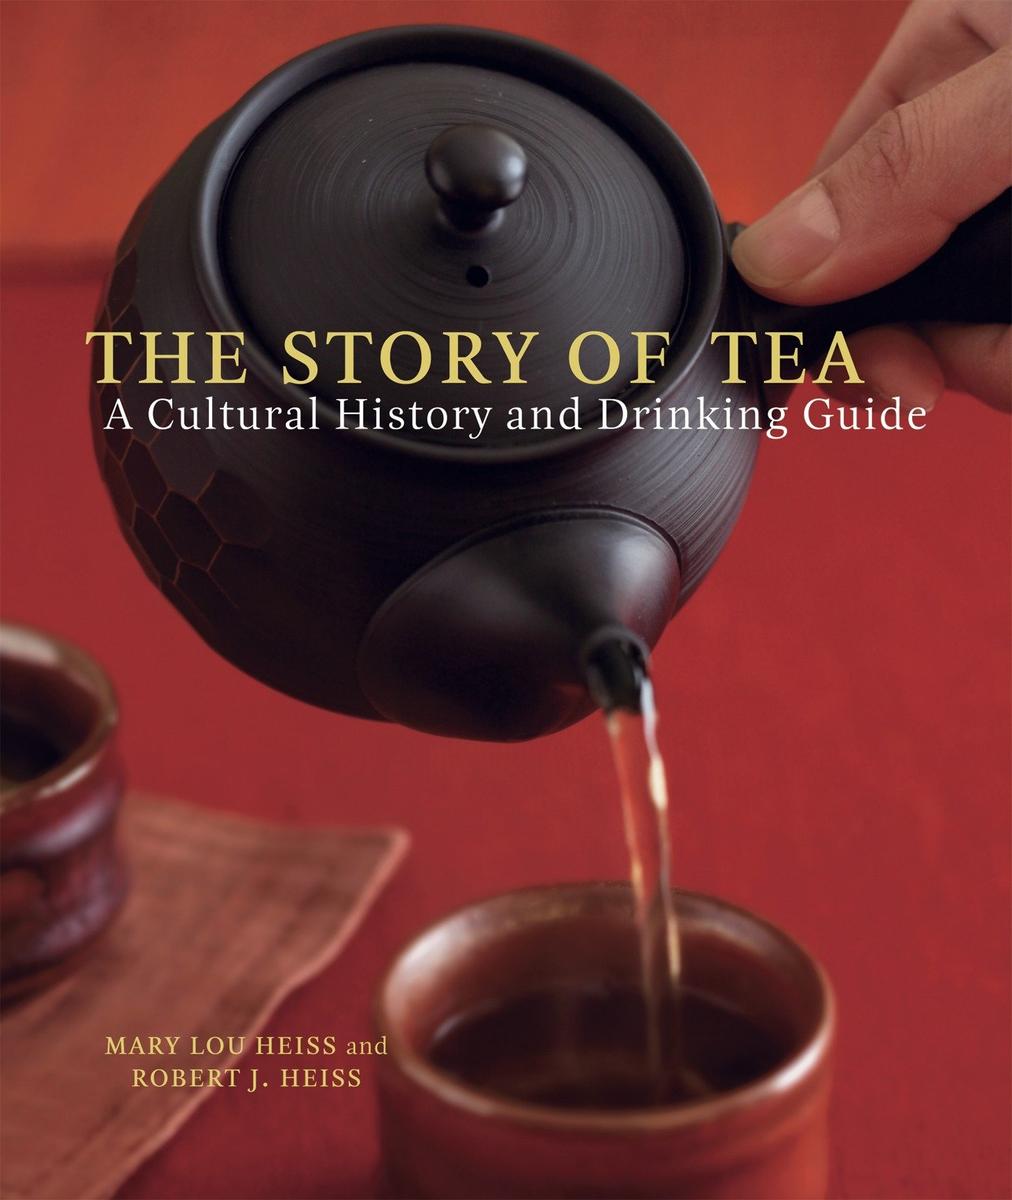 The Story of Tea is a book about tea history, trade, culture, and general info.